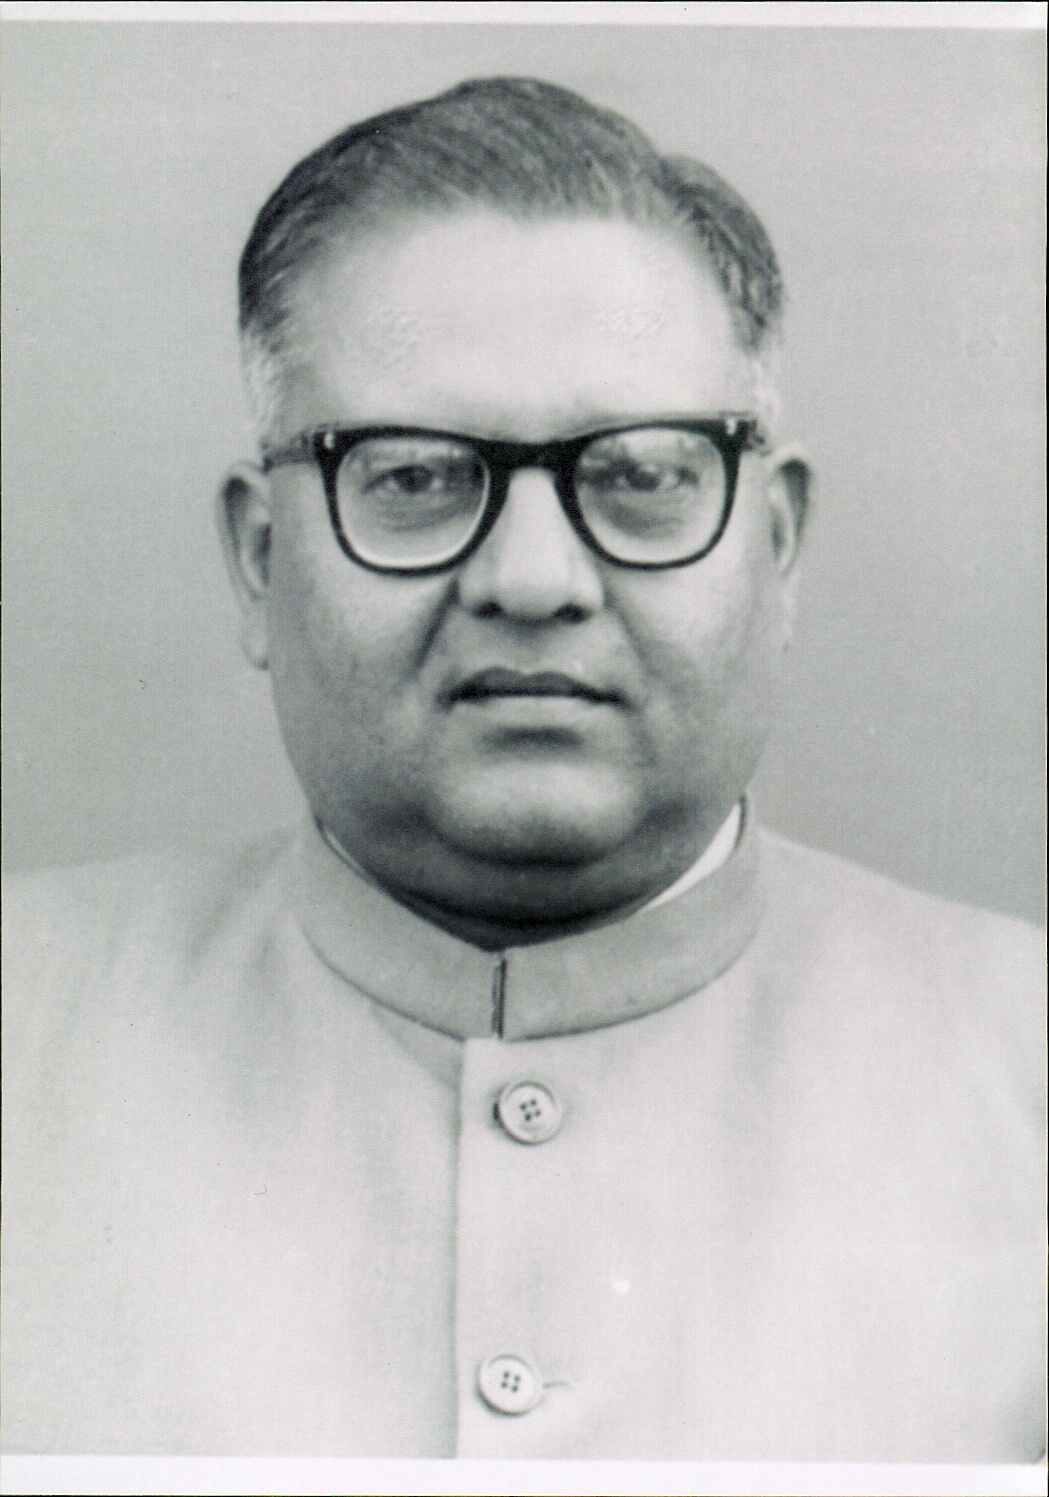 My 2nd late Grand Uncle was an intellectual and a graduate of Allahabad / Benaras University. He retired as a senior Executive for the Indian Railways & was stationed all over North India